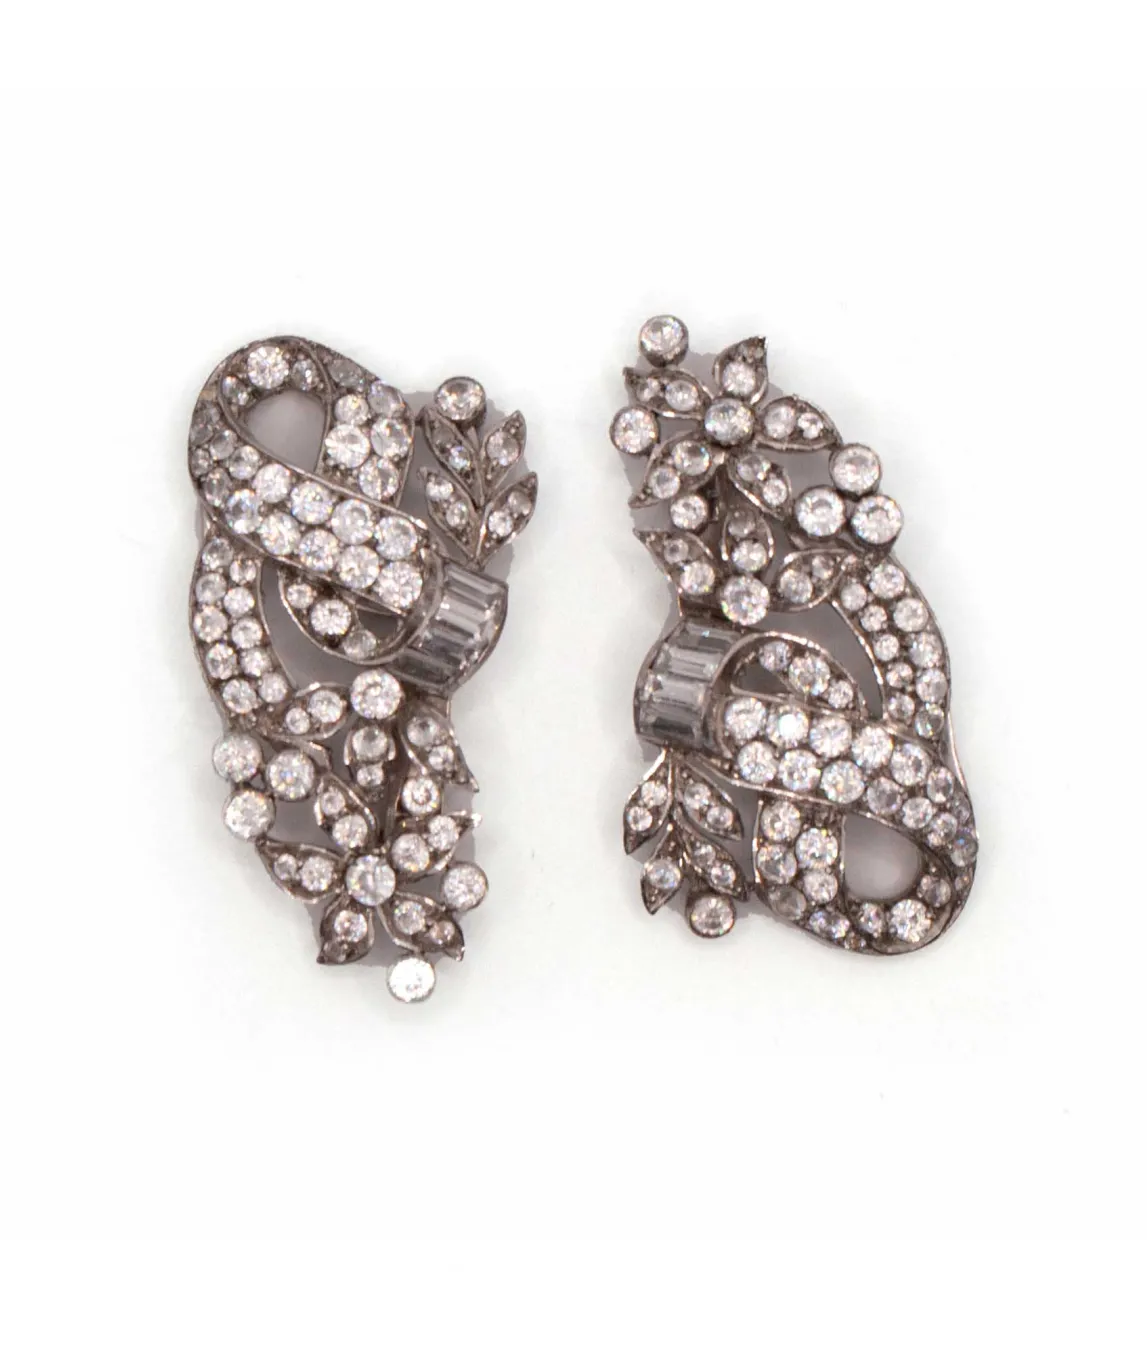 Pair of clear crystal dress clips on silver metal